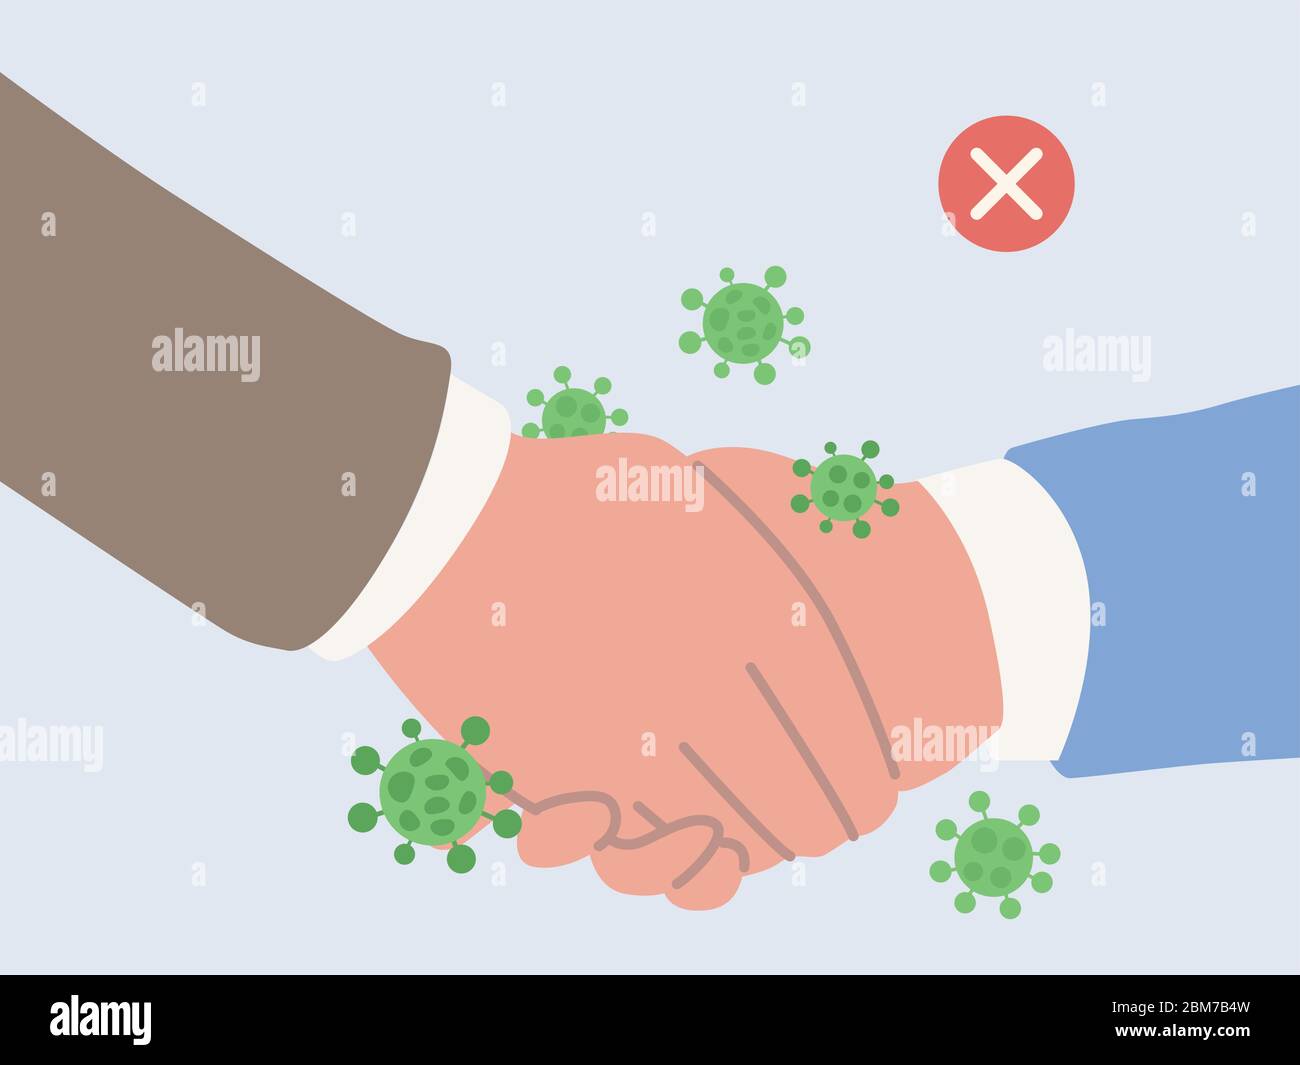 Handshake of 2 people make virus spreading that is wrong way to greet when Covid-19 outbreak. Illustration about physical distancing for protect virus Stock Vector